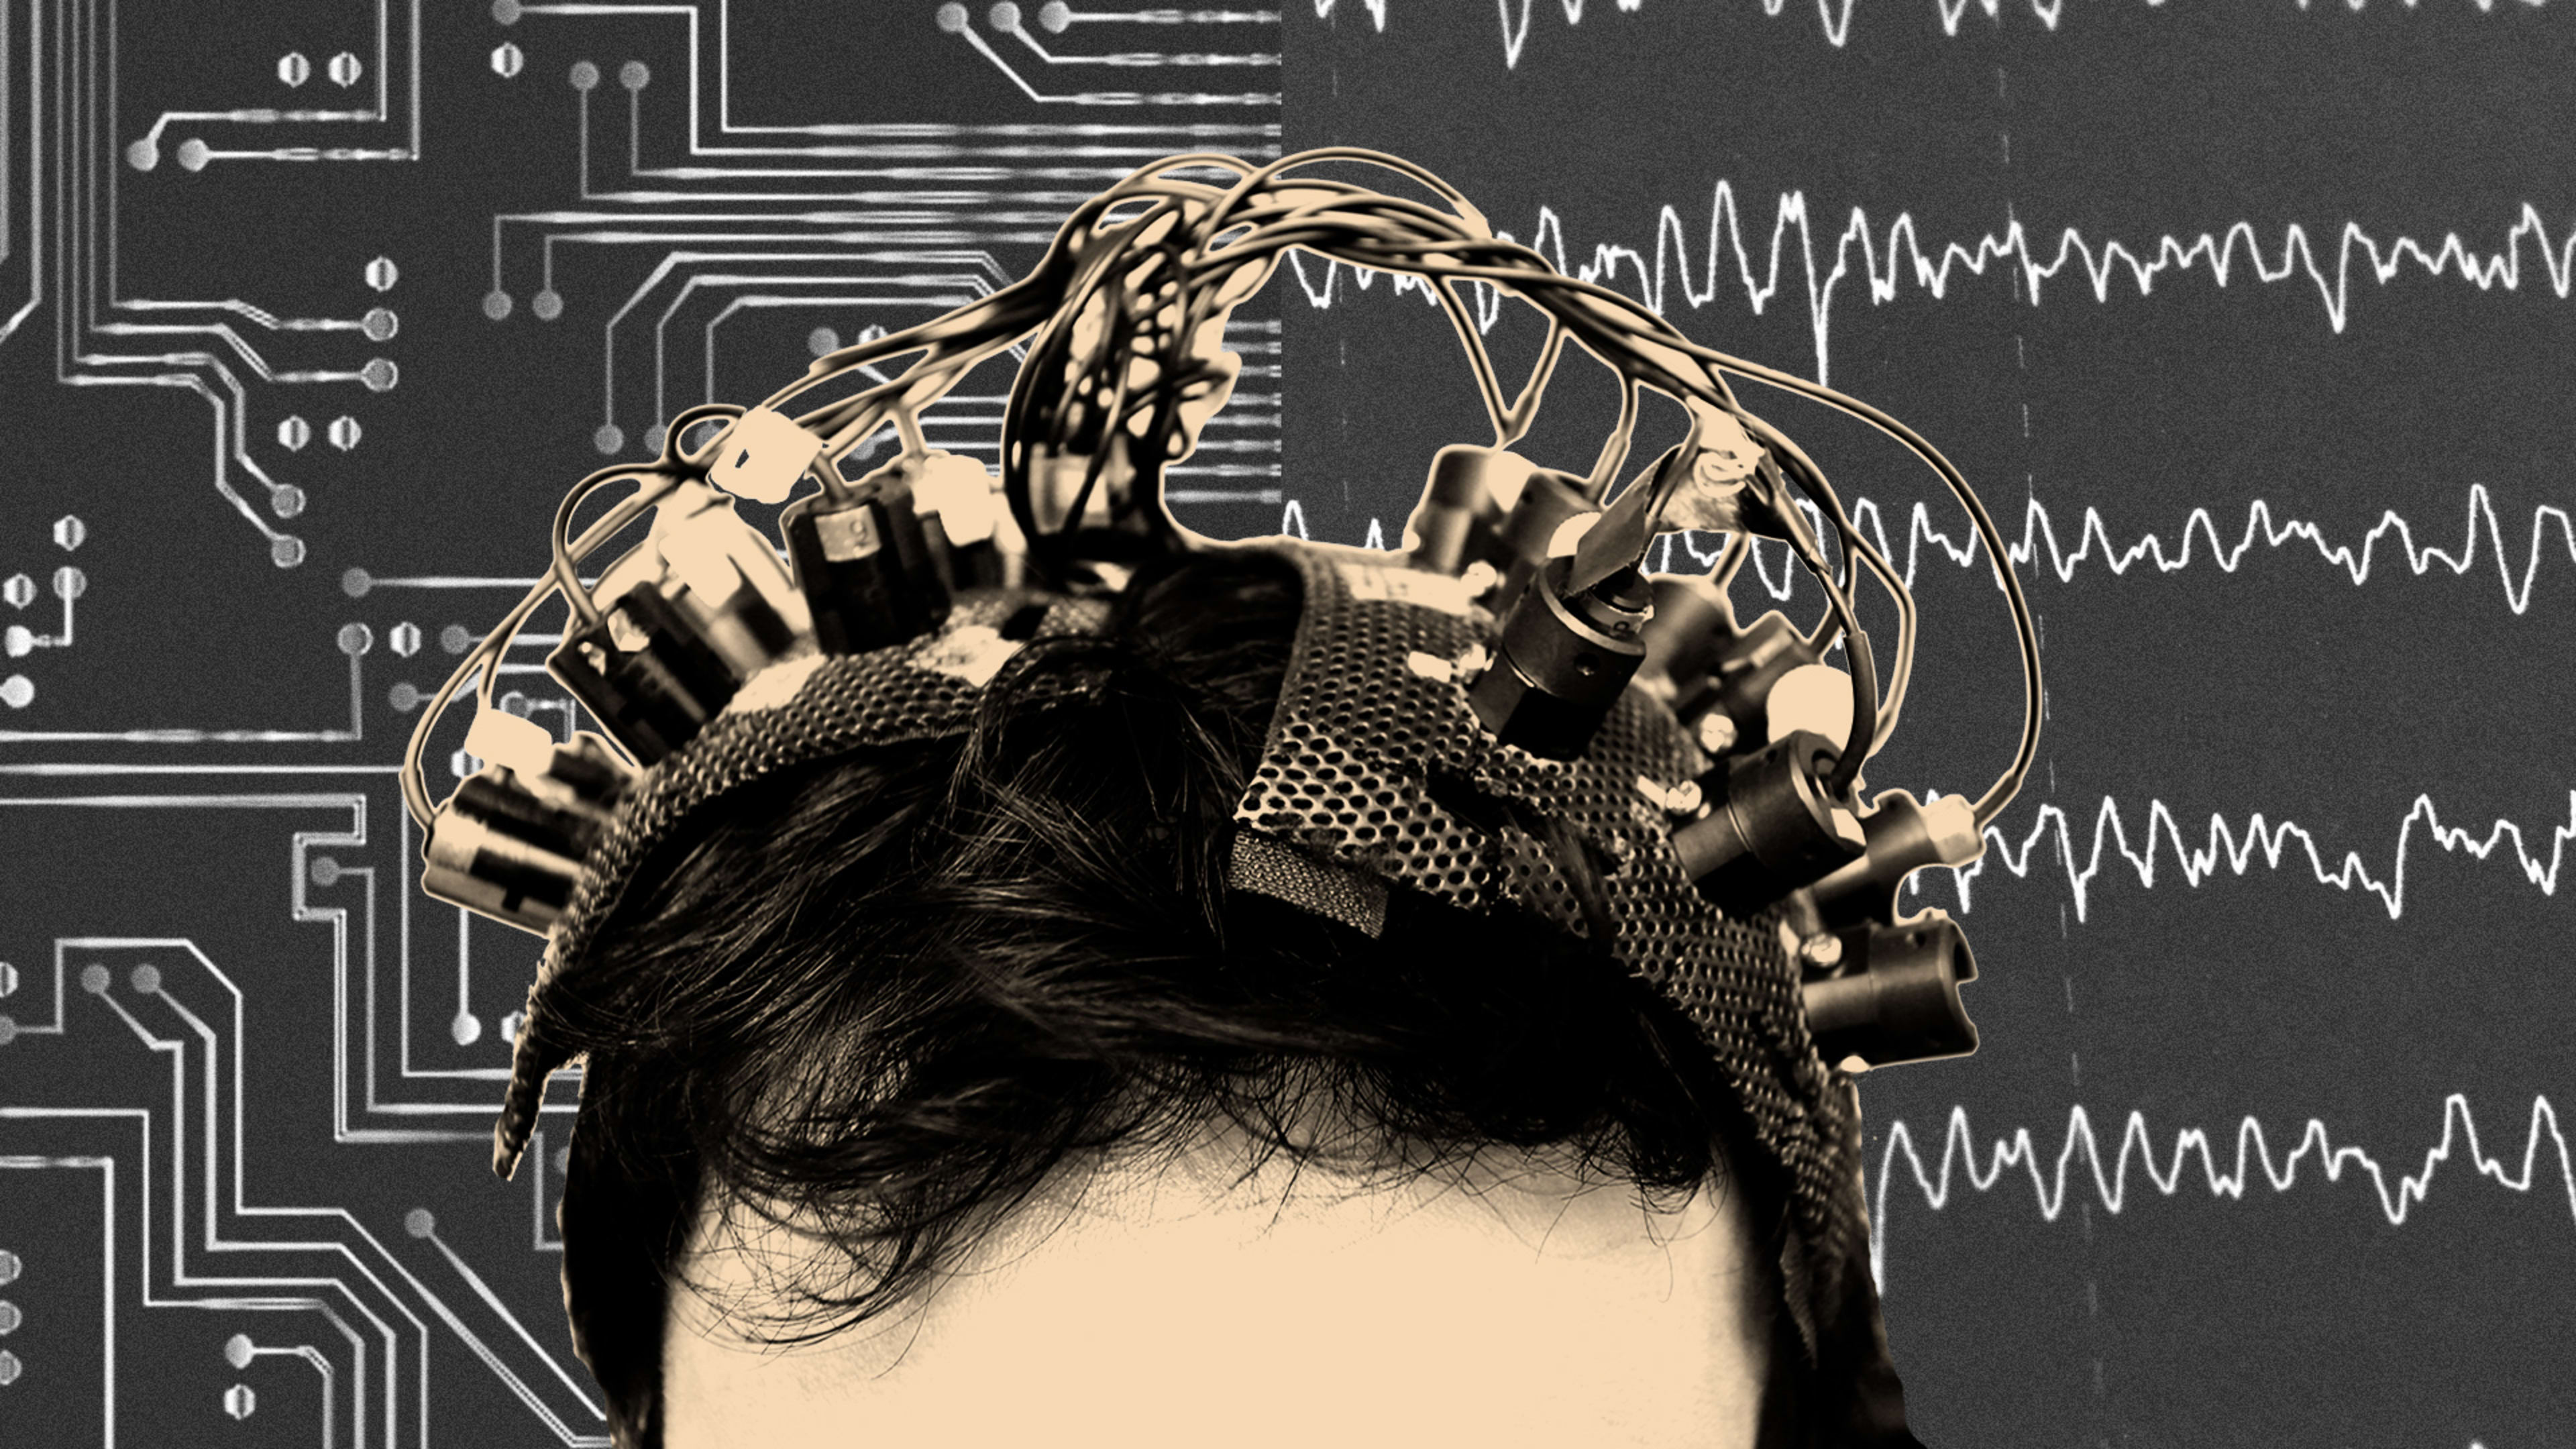 Brain-computer interfaces could change the world—but at what cost?